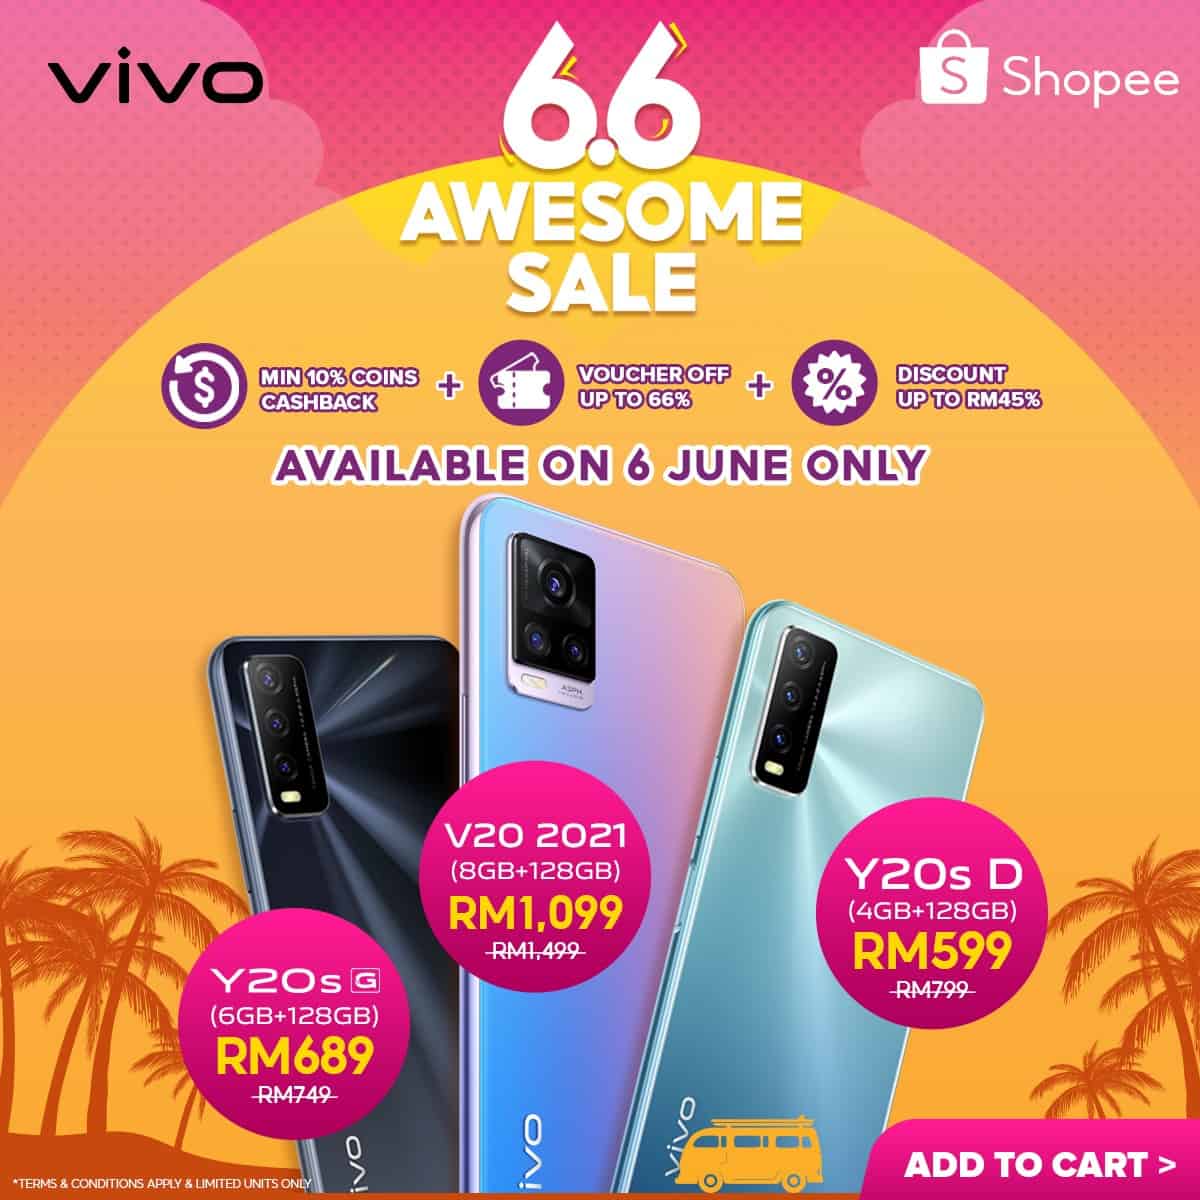 You are currently viewing vivo x Shopee 6.6 Awesome Sale offers limited time great deals on 6 June